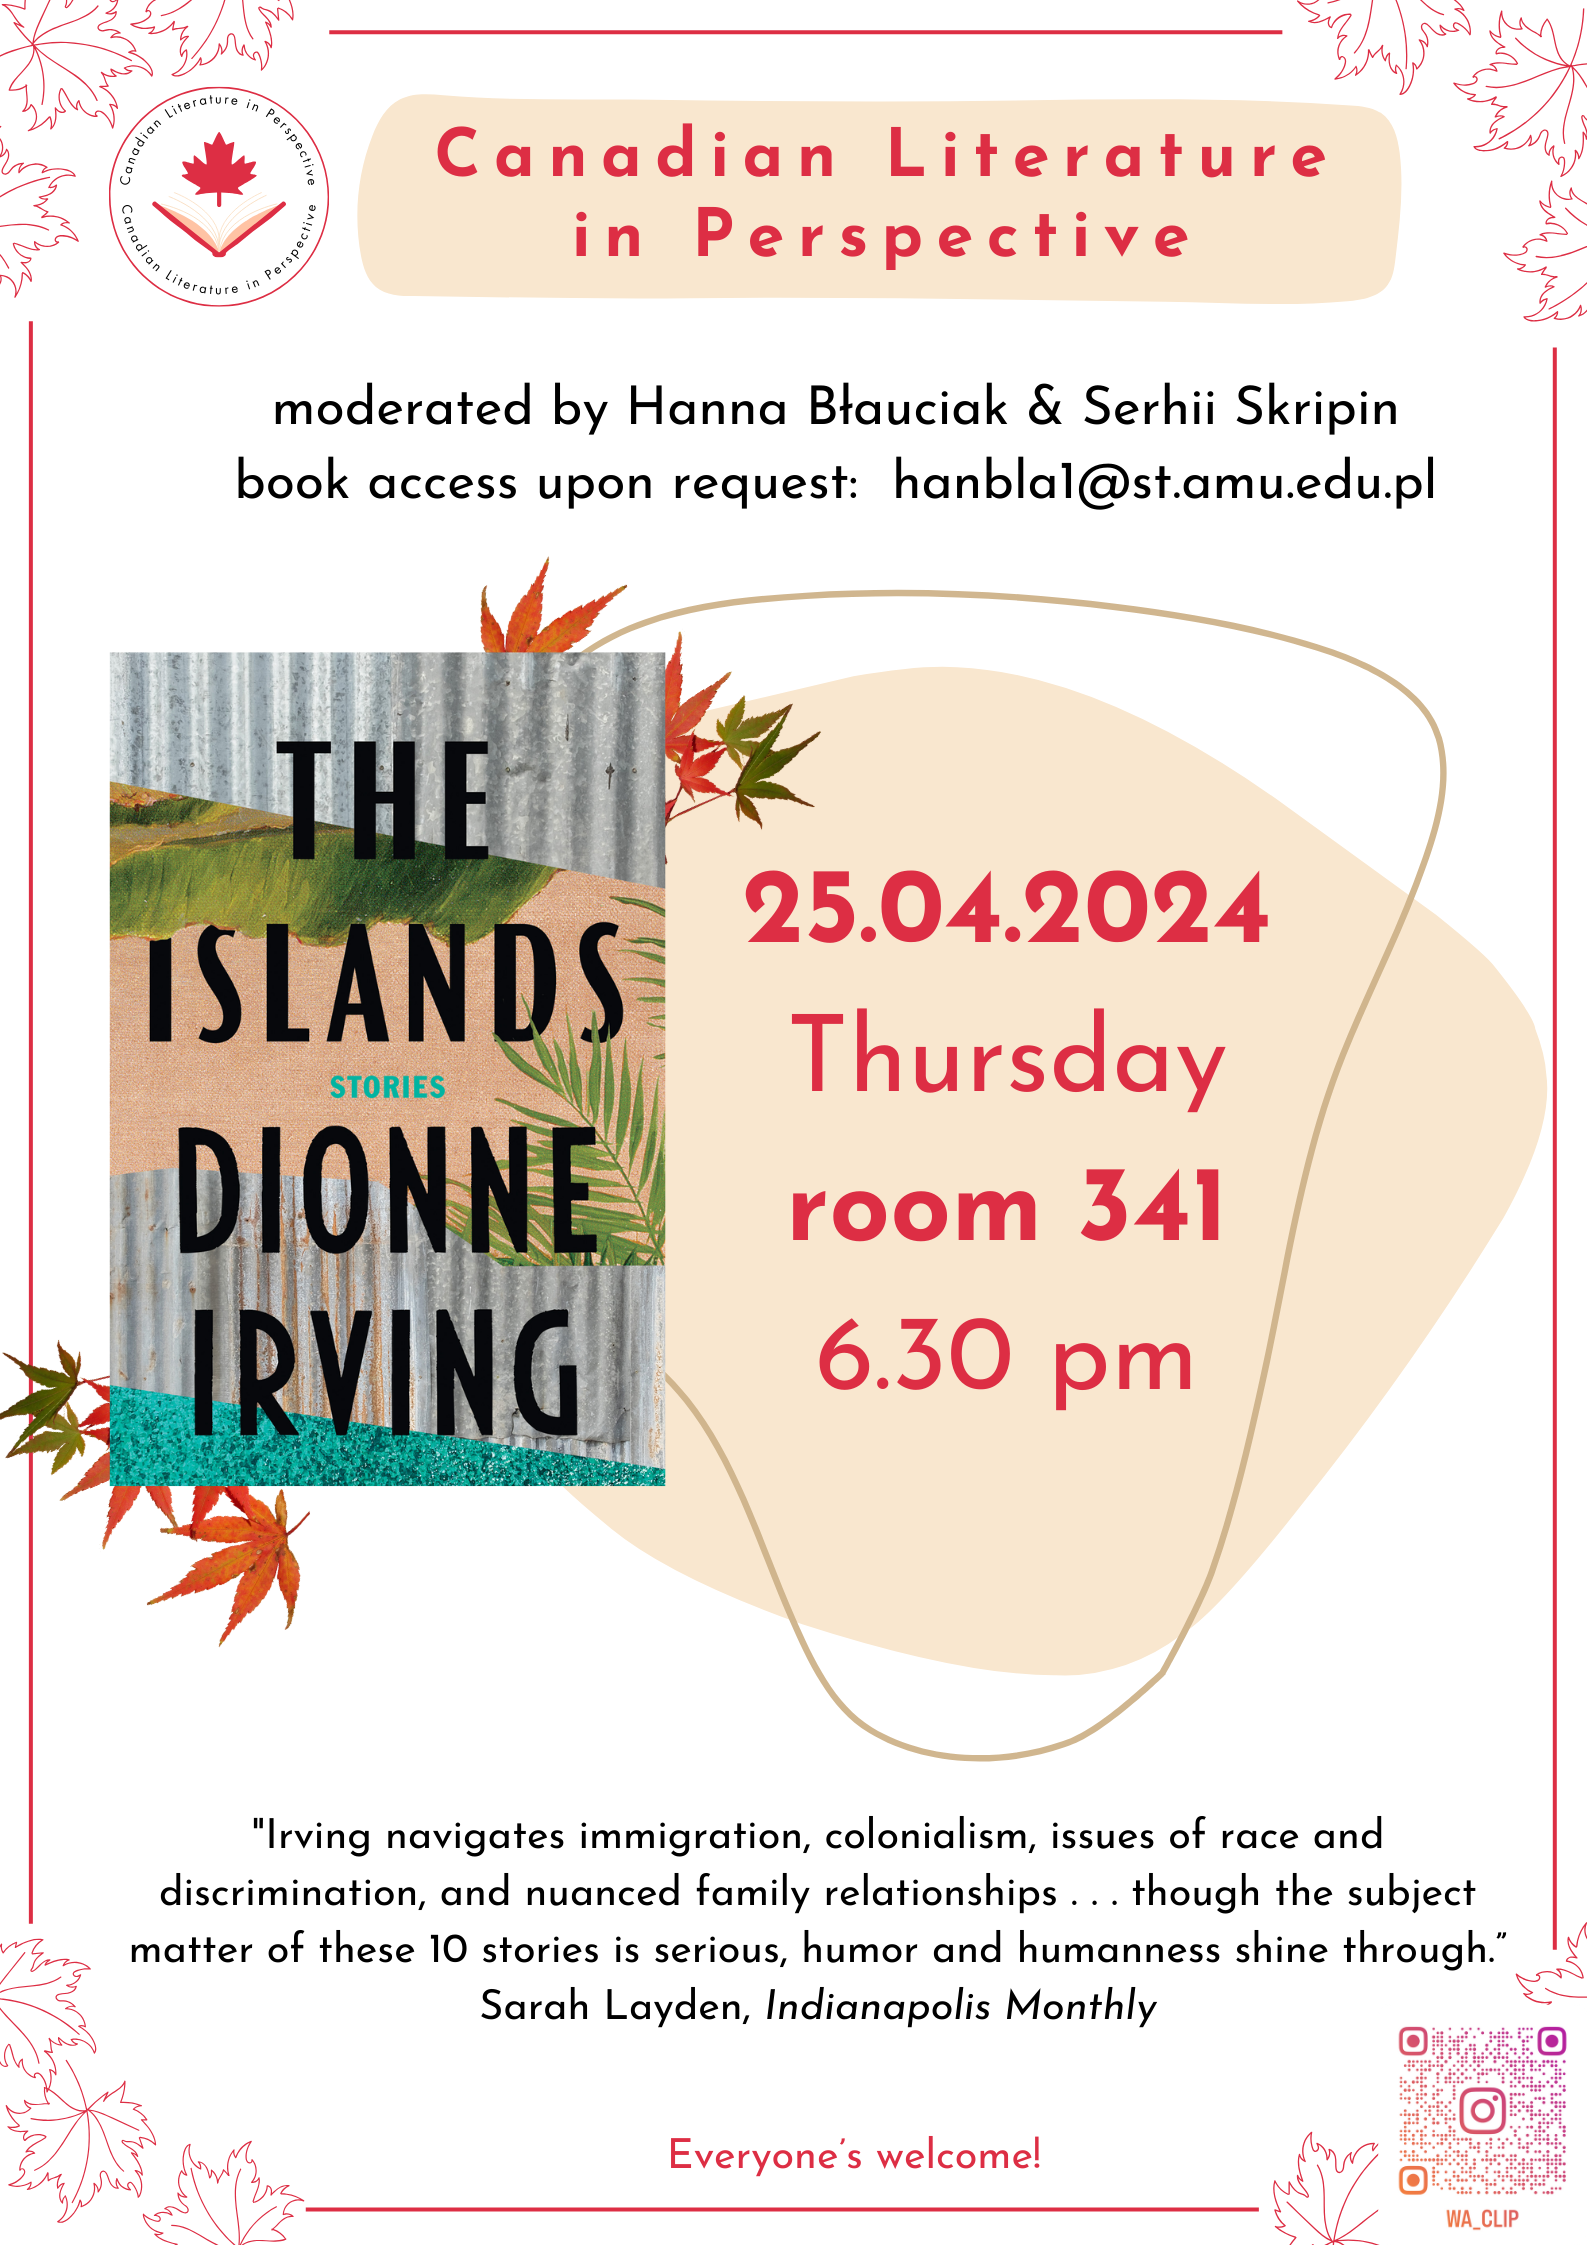 Poster for the meeting with embedded text identical to the text in the announcement. The poster also includes the cover of Dionne Irving's book.